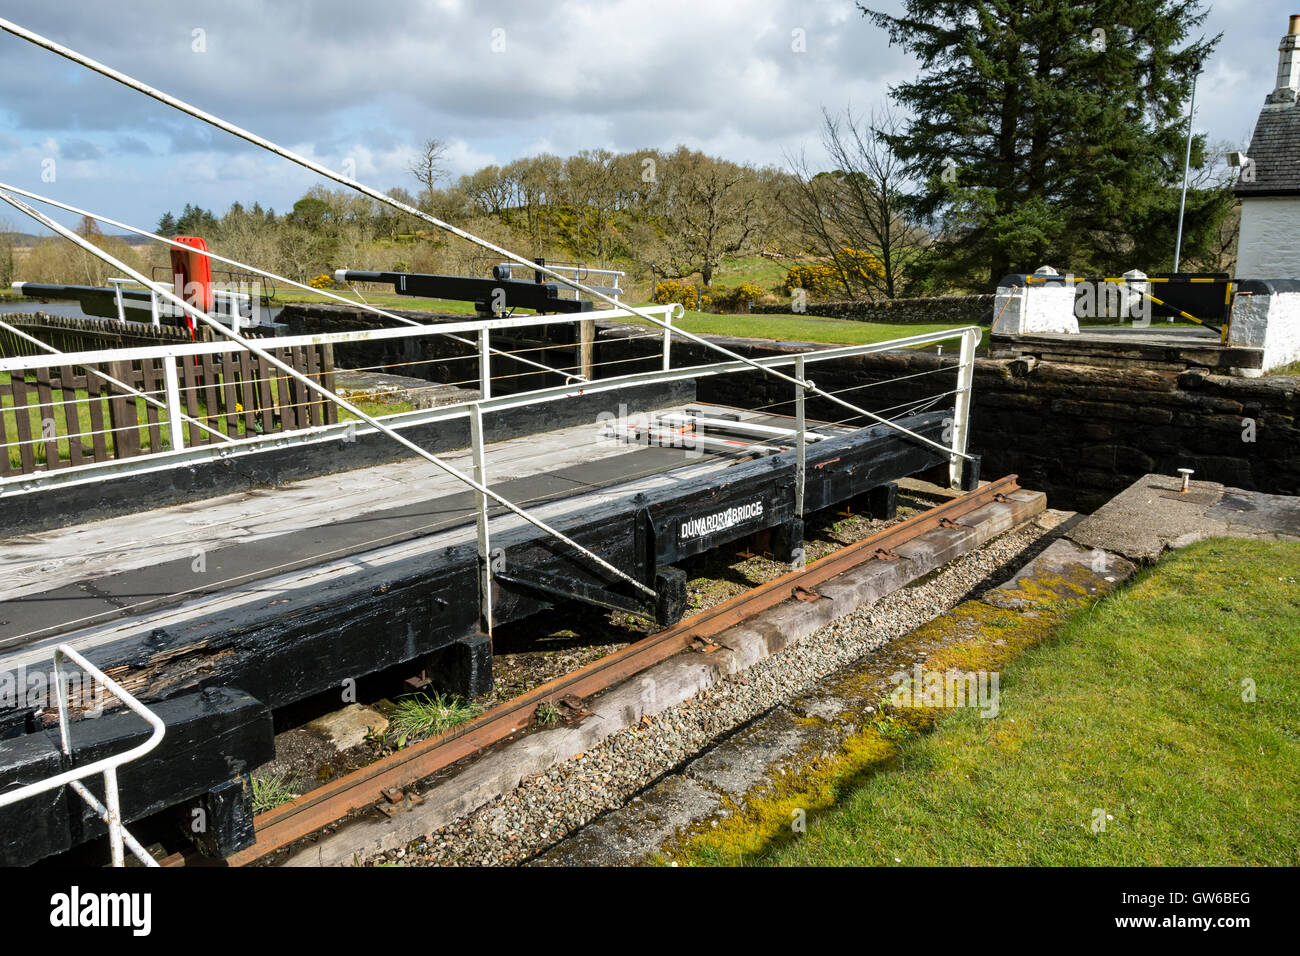 The Retractable Bridge at Dunardry, Lock 11 on the Crinan Canal, Argyll and Bute, Scotland, UK Stock Photo